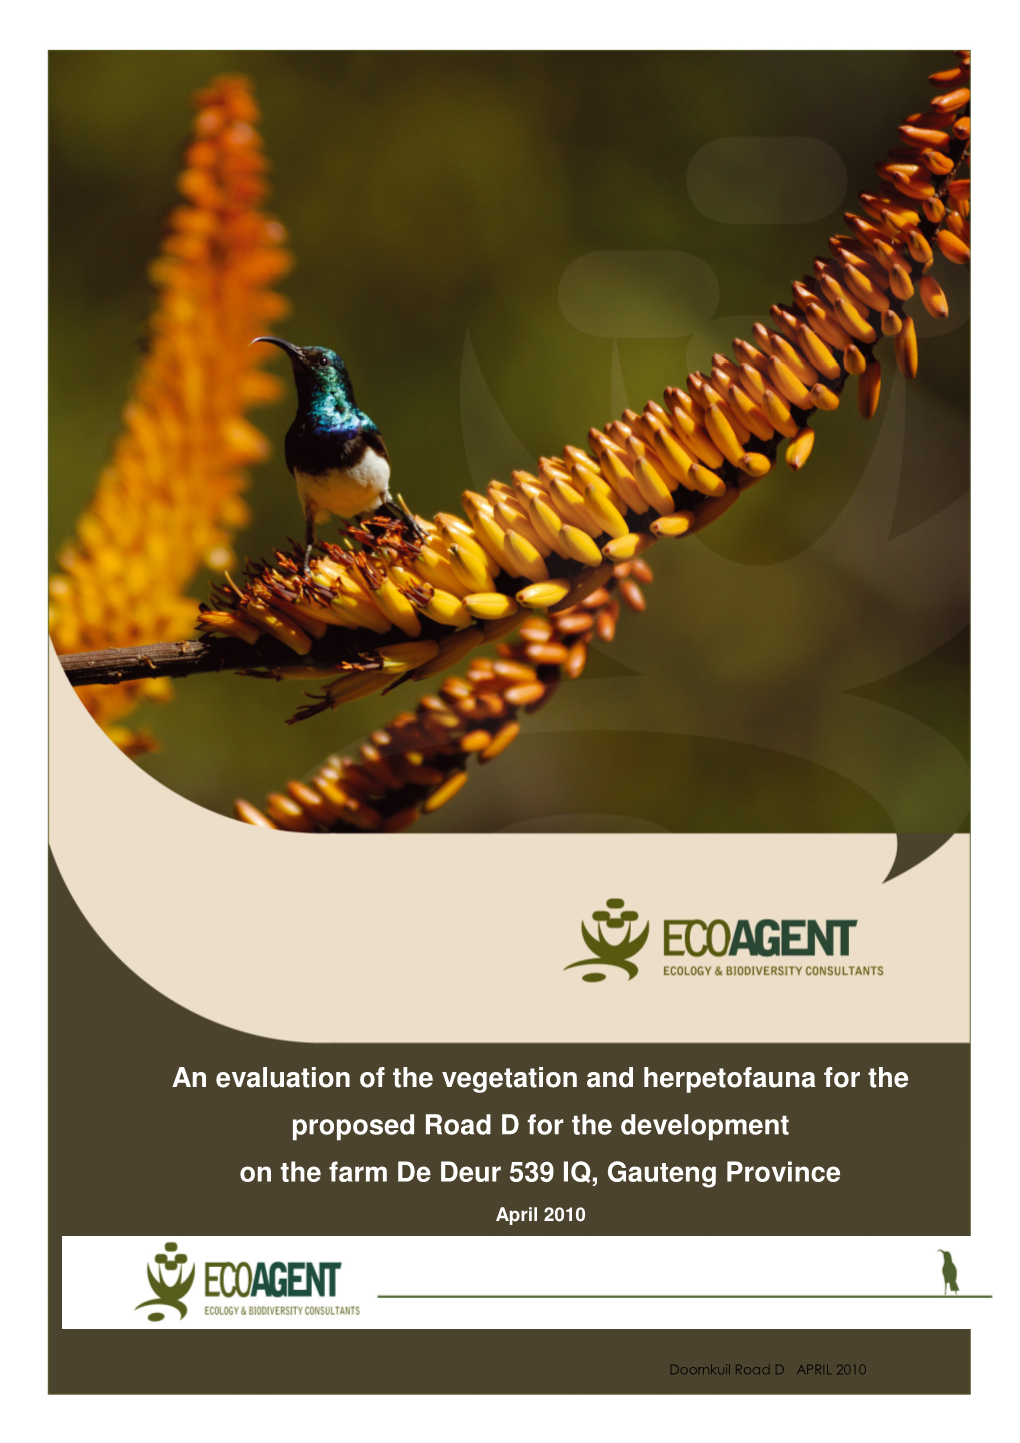 An Evaluation of the Vegetation and Herpetofauna for the Proposed Road D for the Development on the Farm De Deur 539 IQ, Gauteng Province